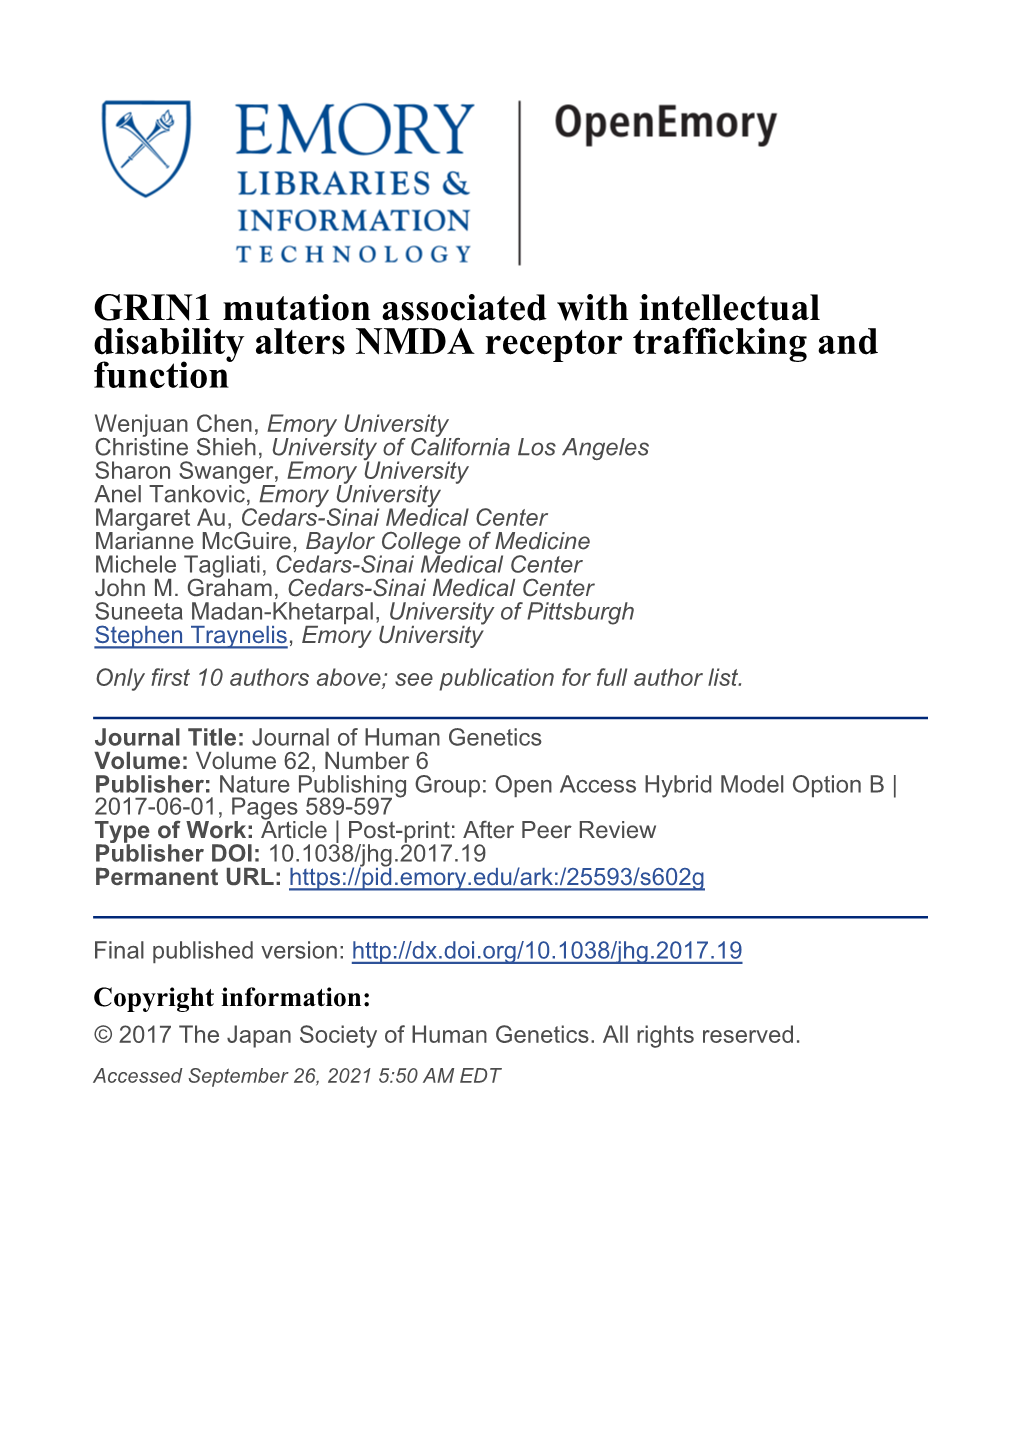 GRIN1 Mutation Associated with Intellectual Disability Alters NMDA Receptor Trafficking and Function